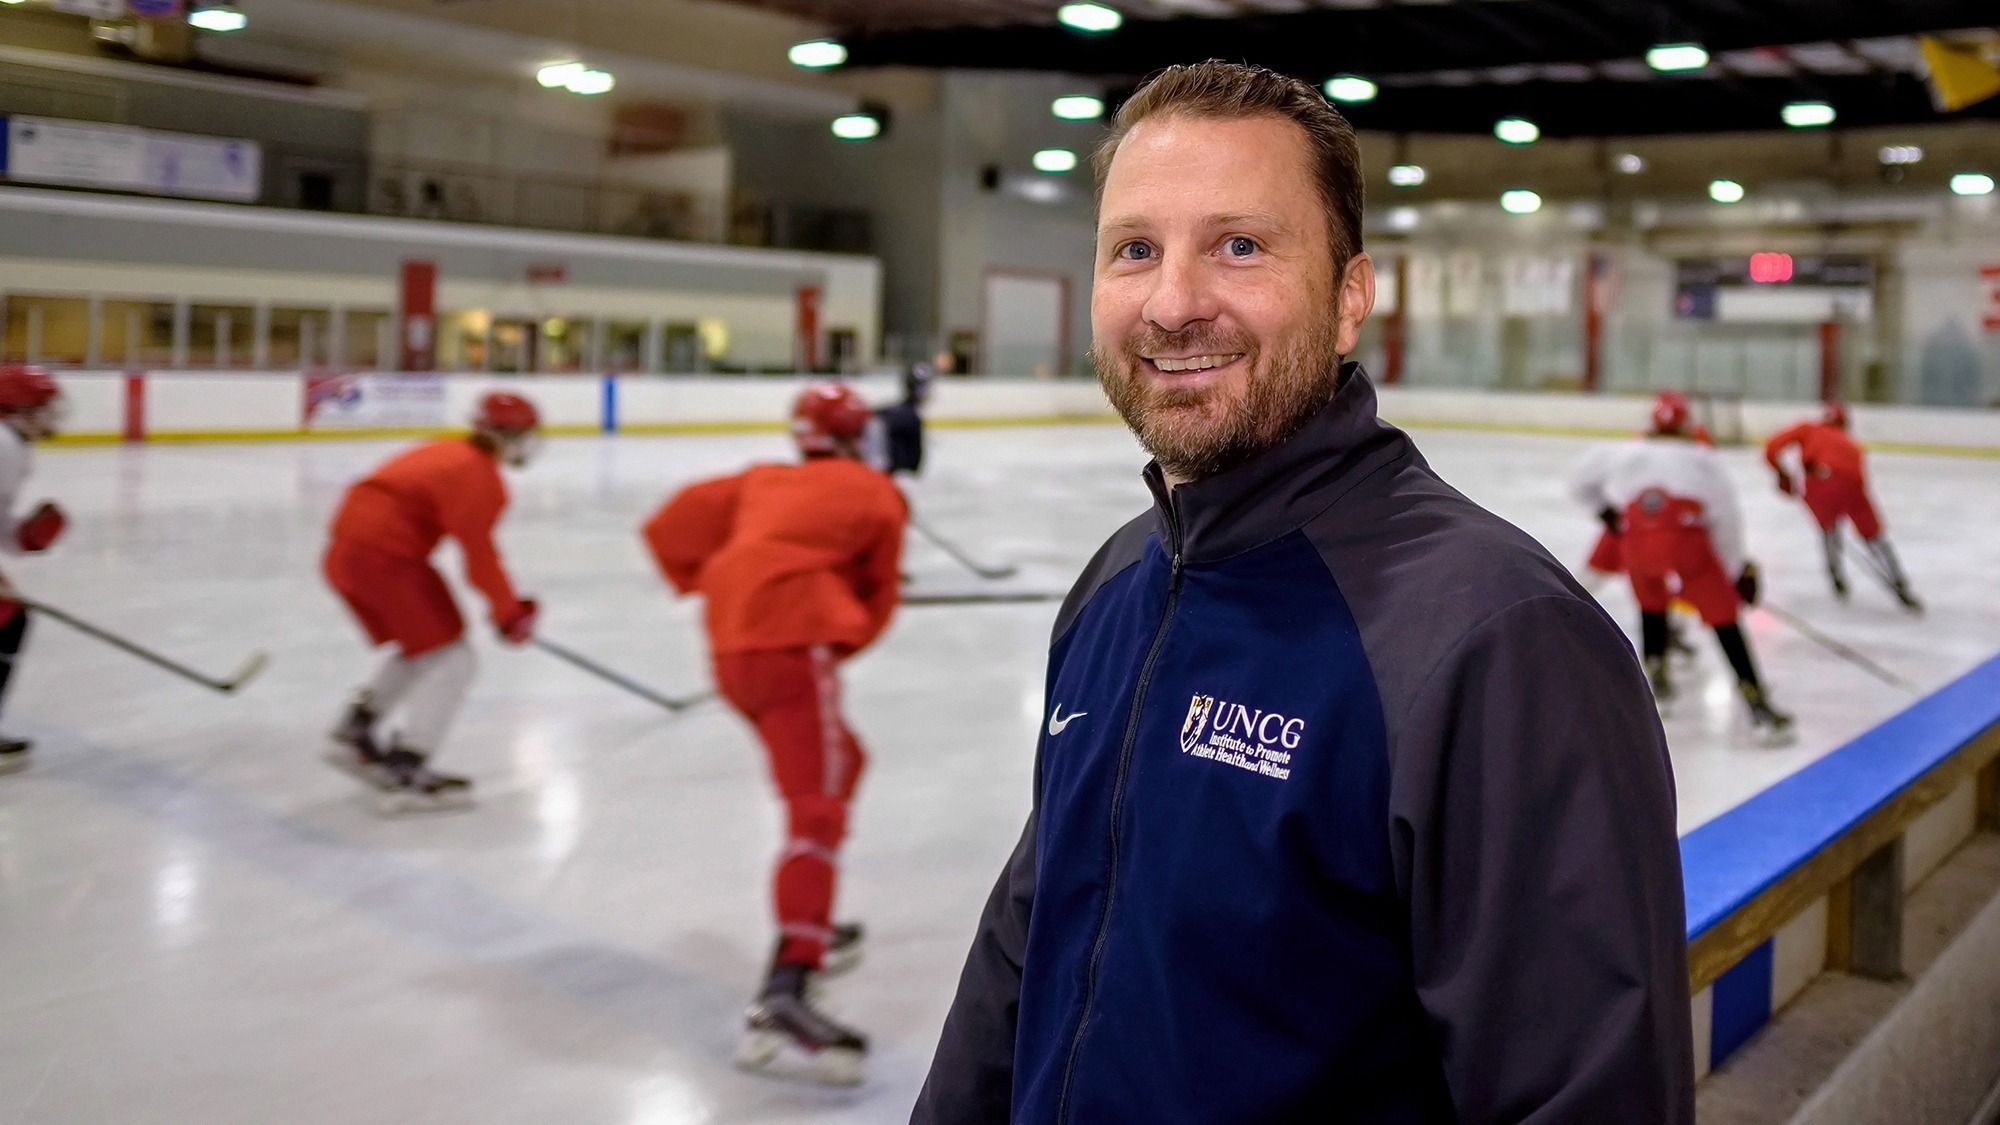 Dr. Milroy standing at an ice rink with a youth hockey game in the background.